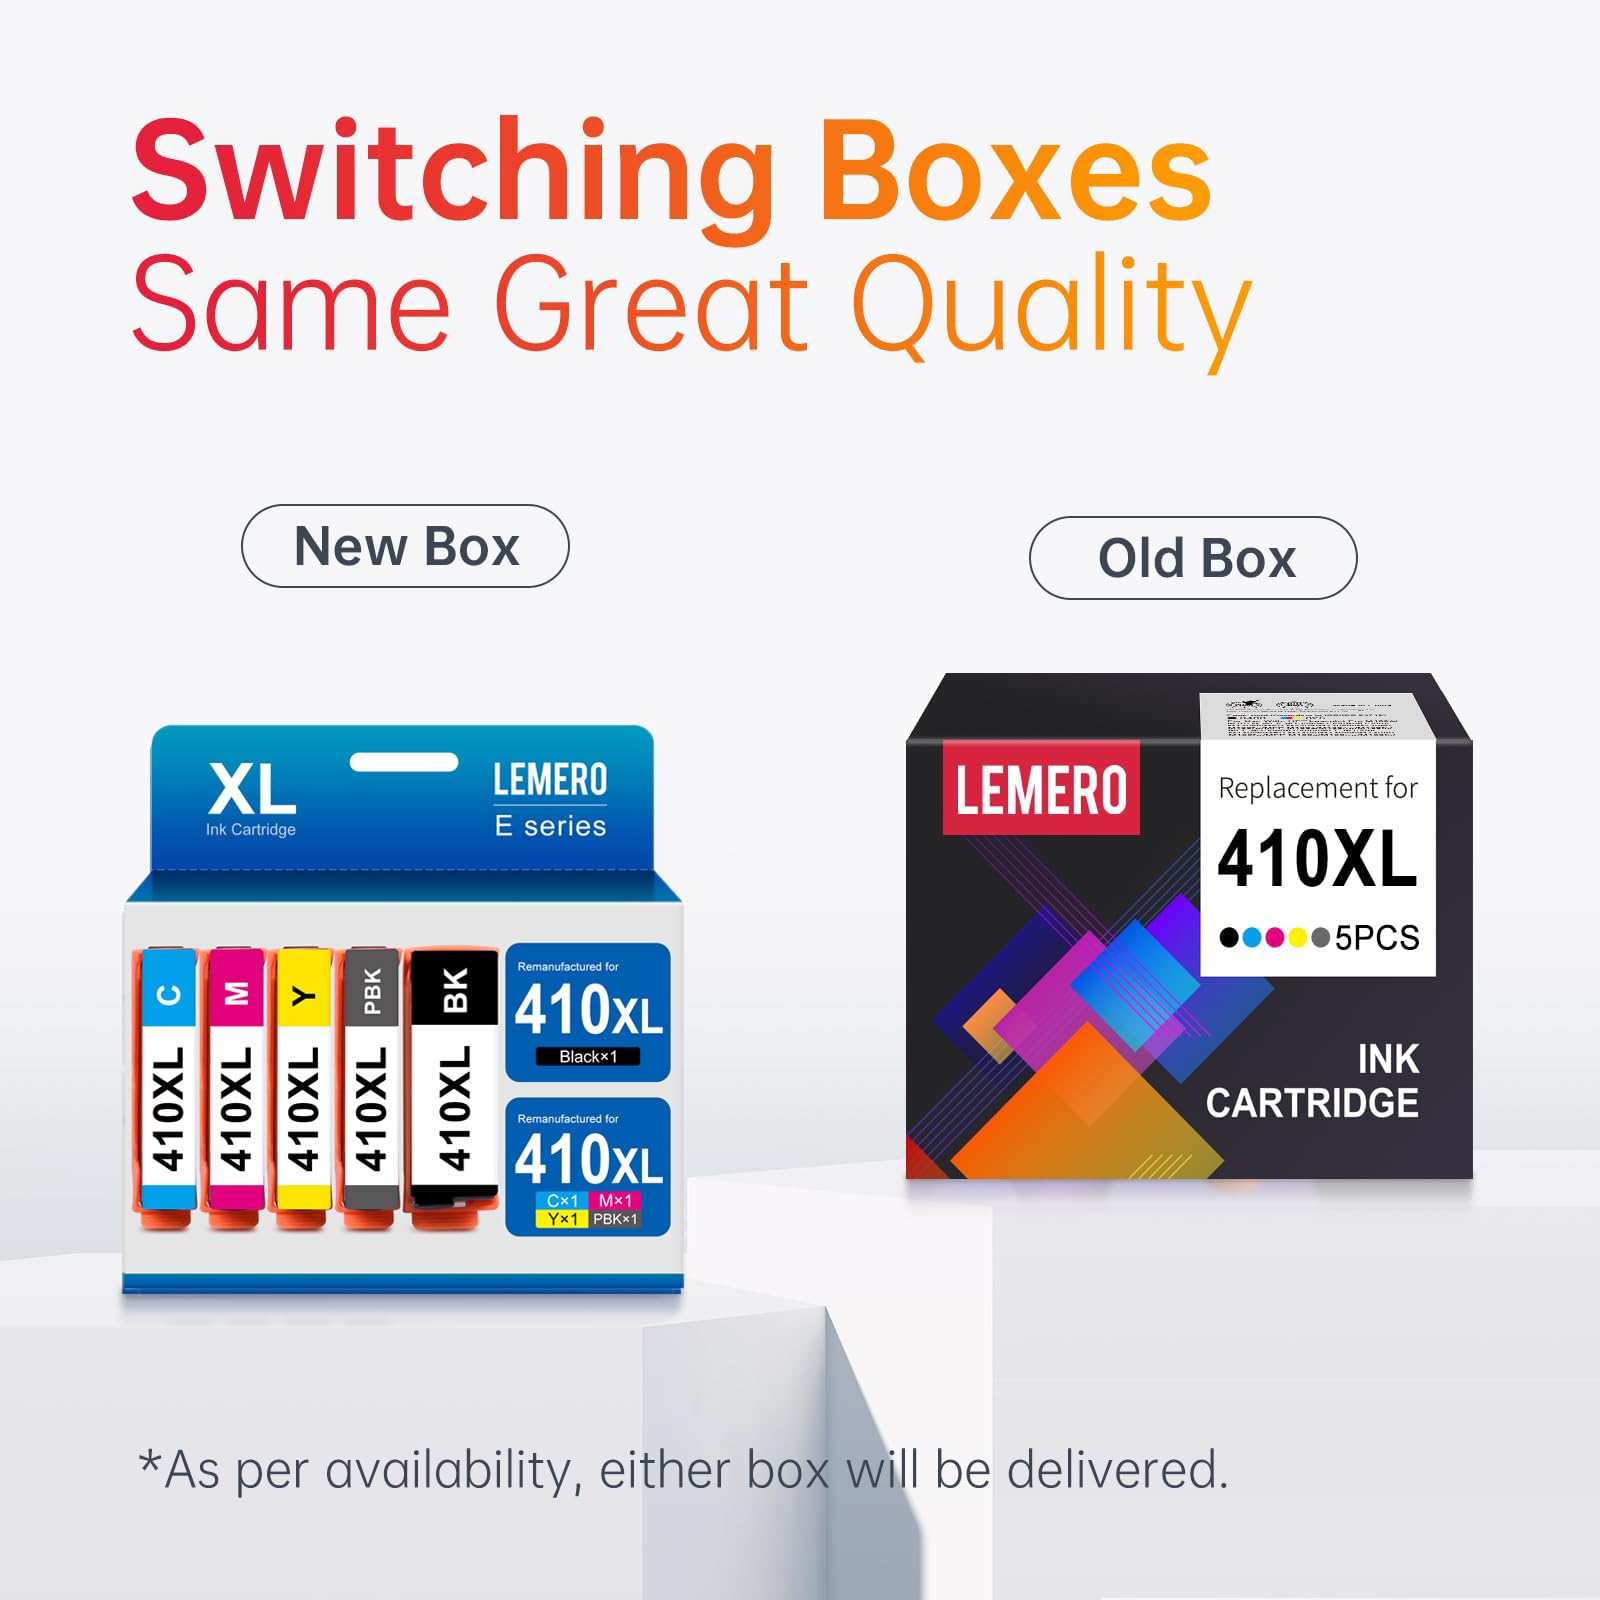 New and old box designs for LEMERO 410XL ink cartridges with the same great quality.